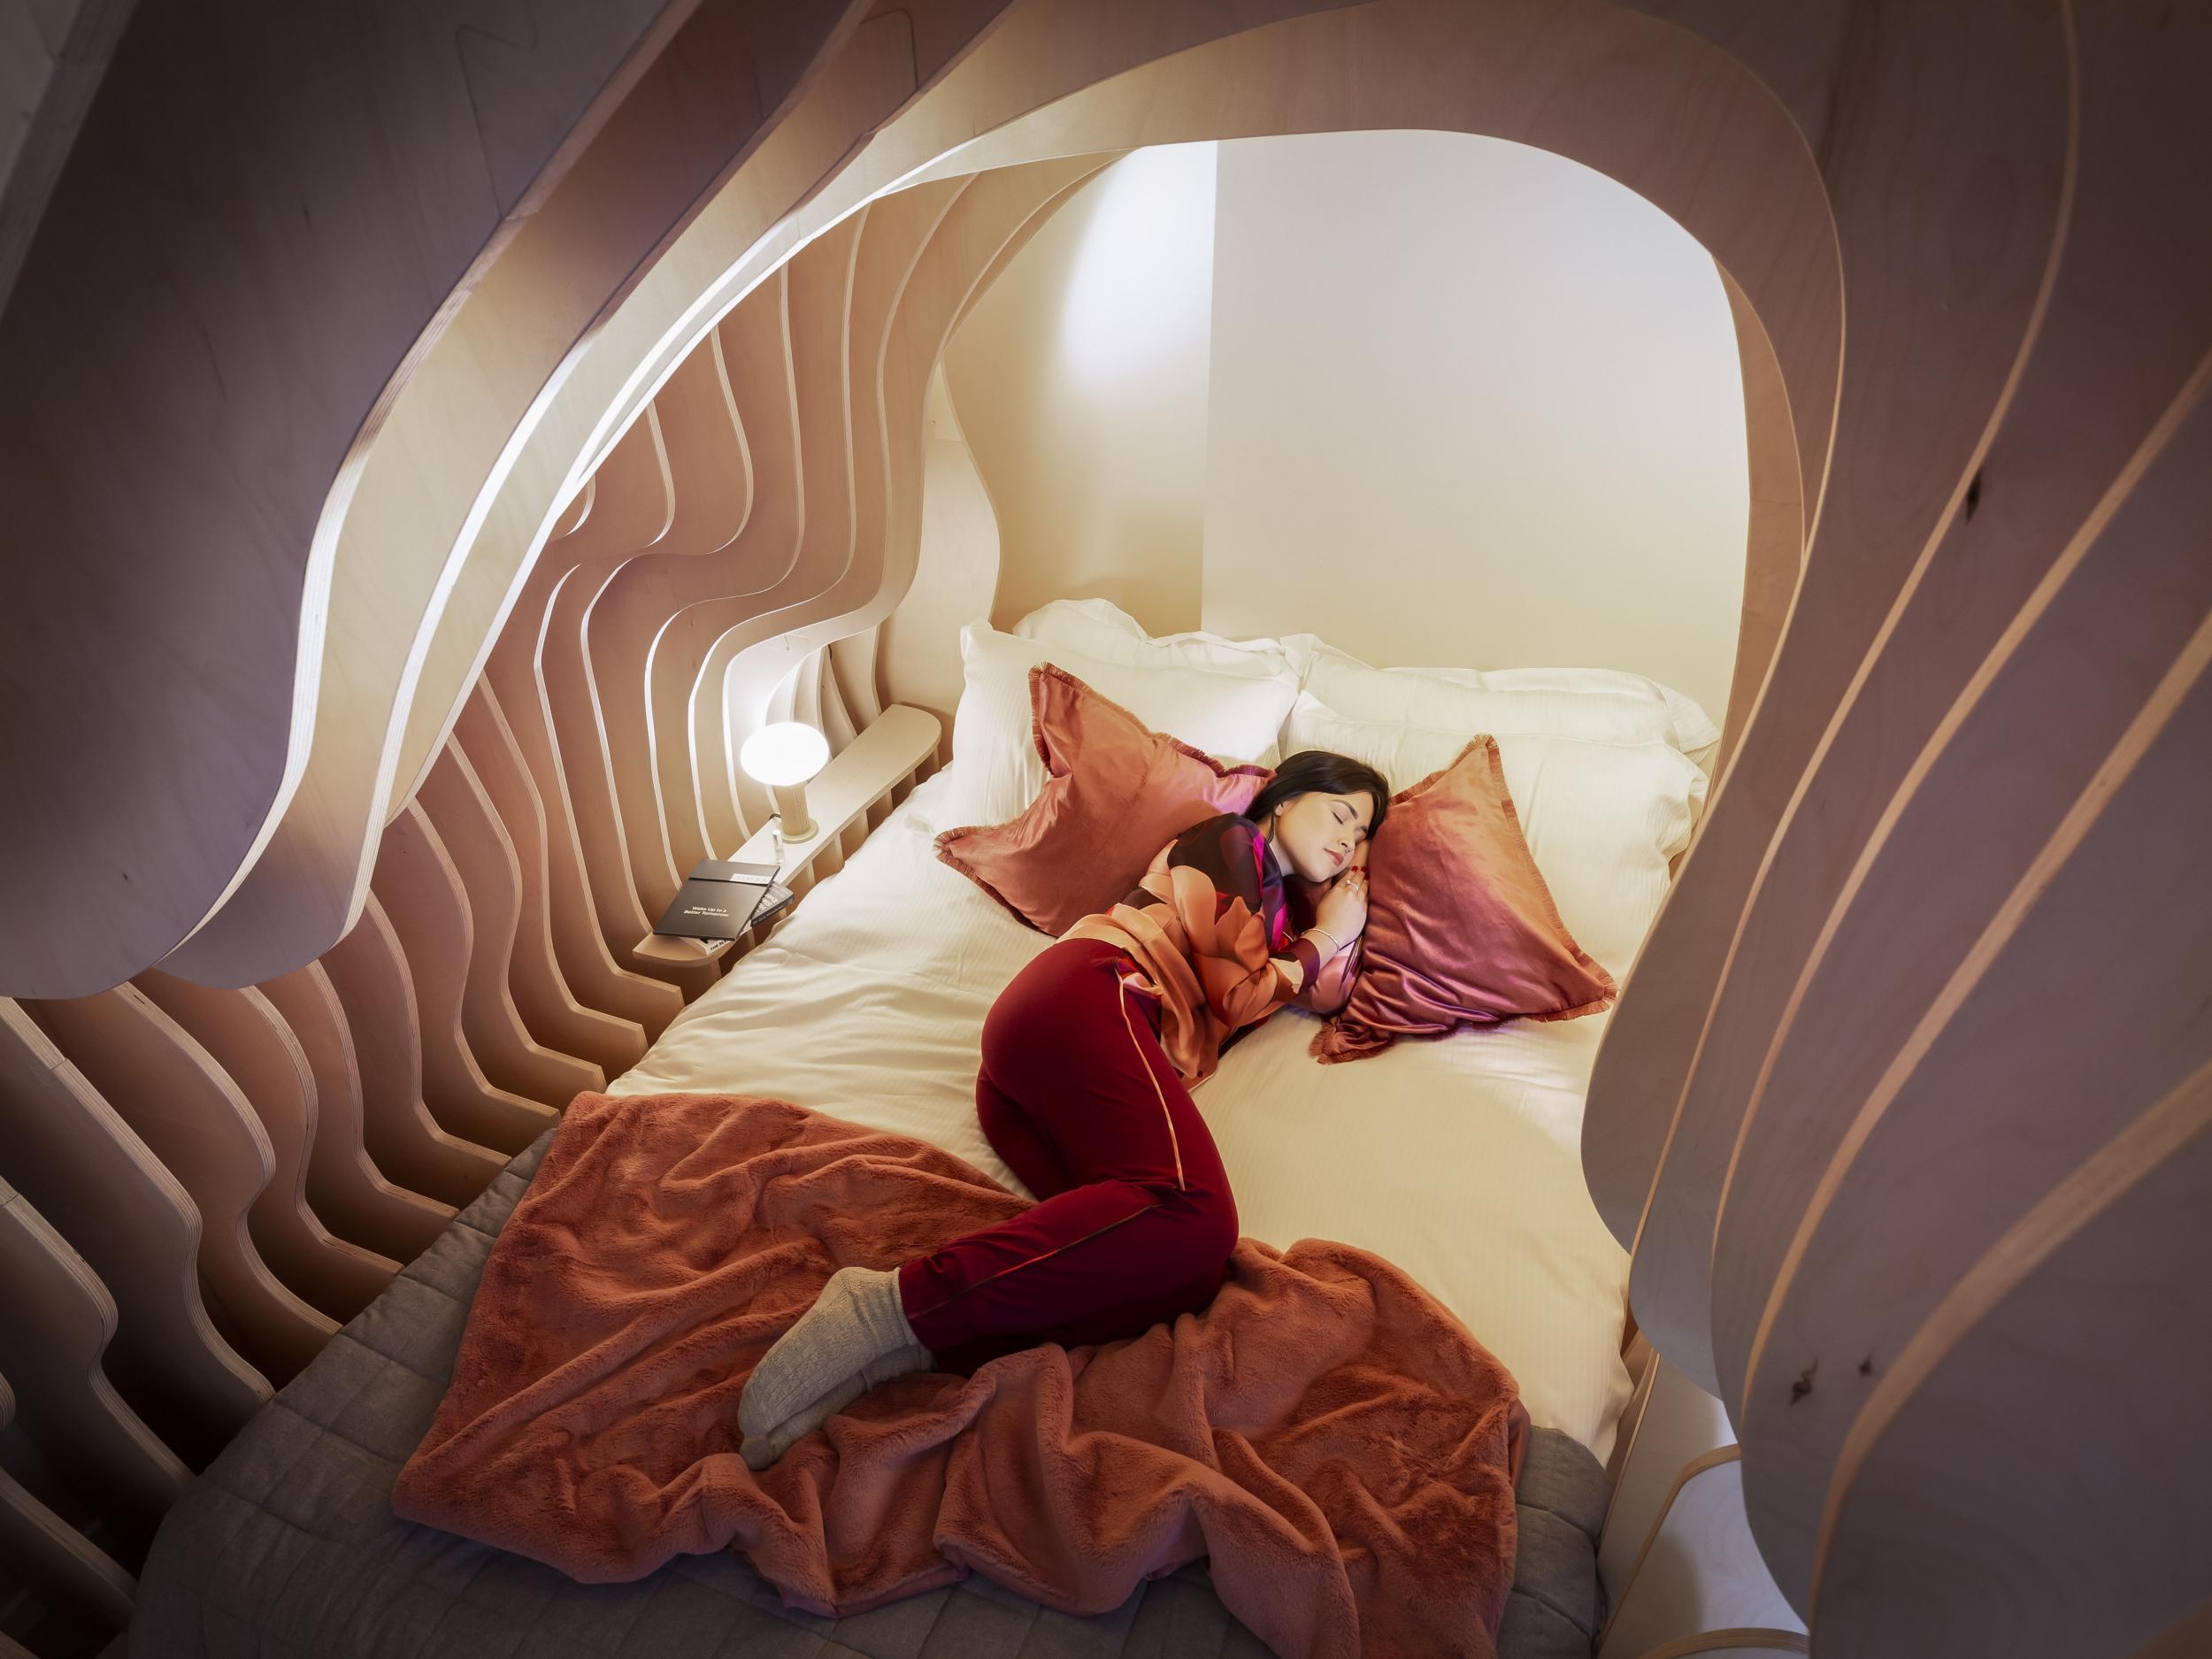 The Zed Rooms aim to help mute the brain's 'red alert' status when sleeping in a new place